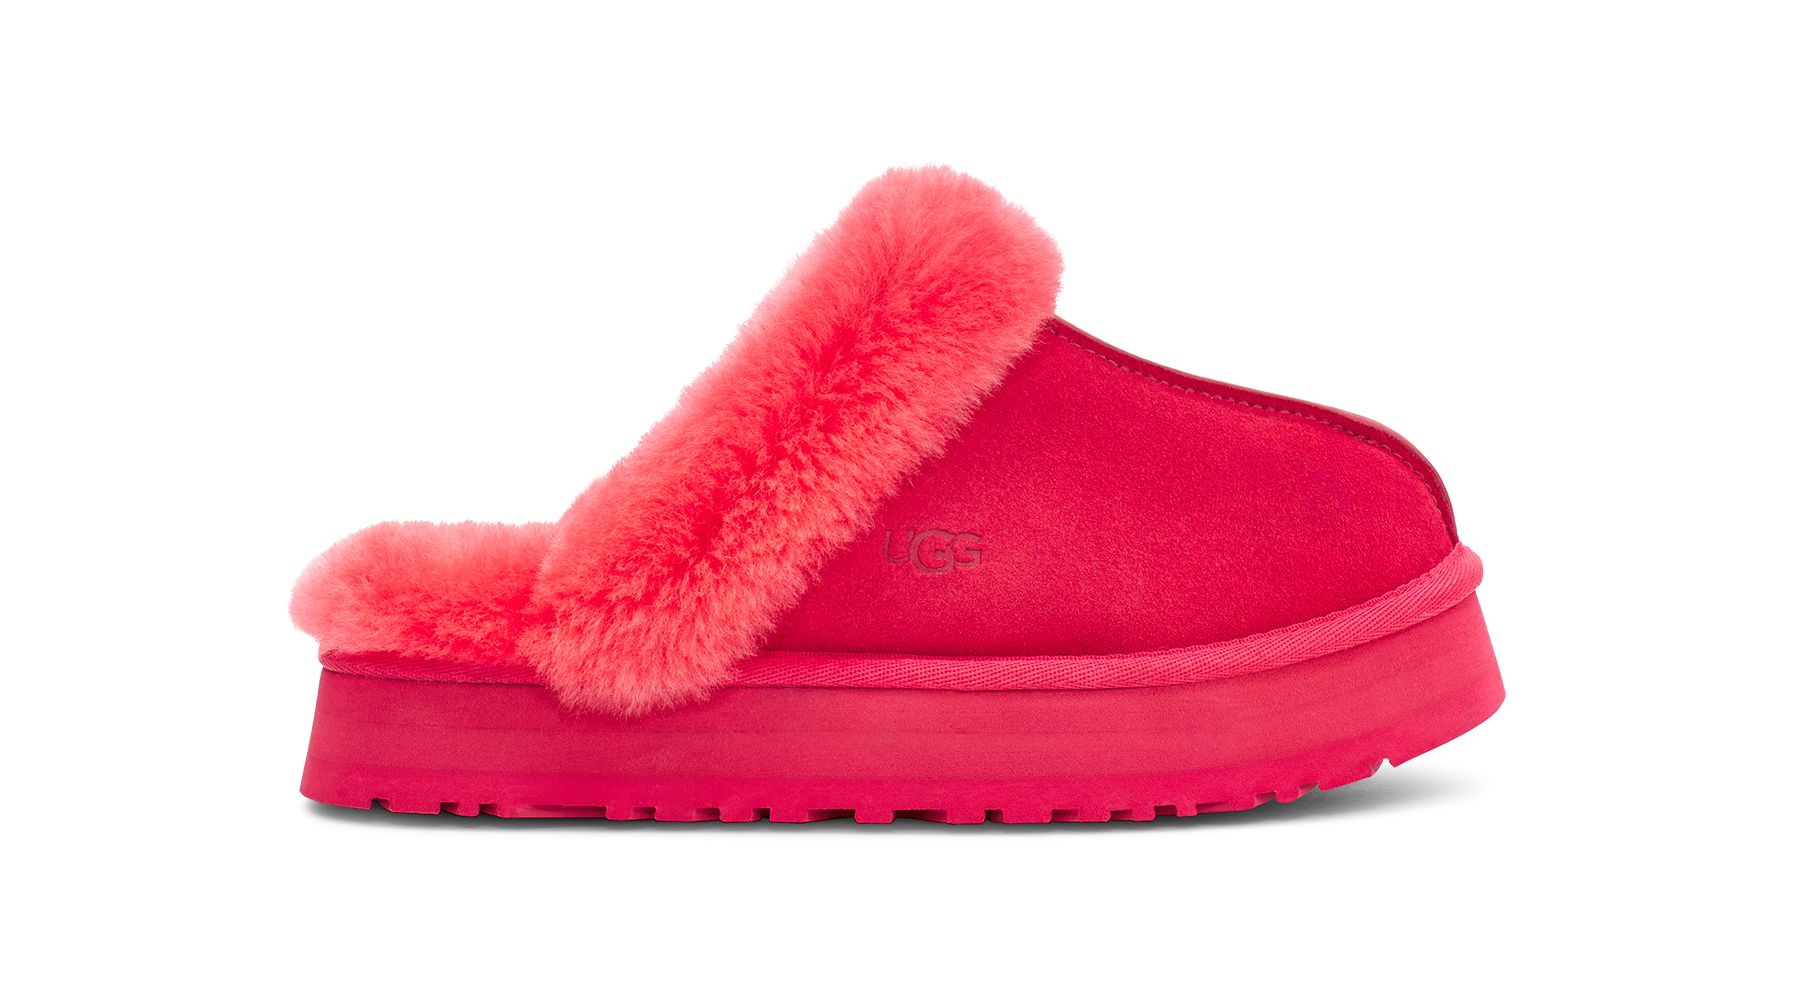 UGG Women's Disquette Sheepskin Slippers in Hibiscus Pink, Size 5 | UGG (US)